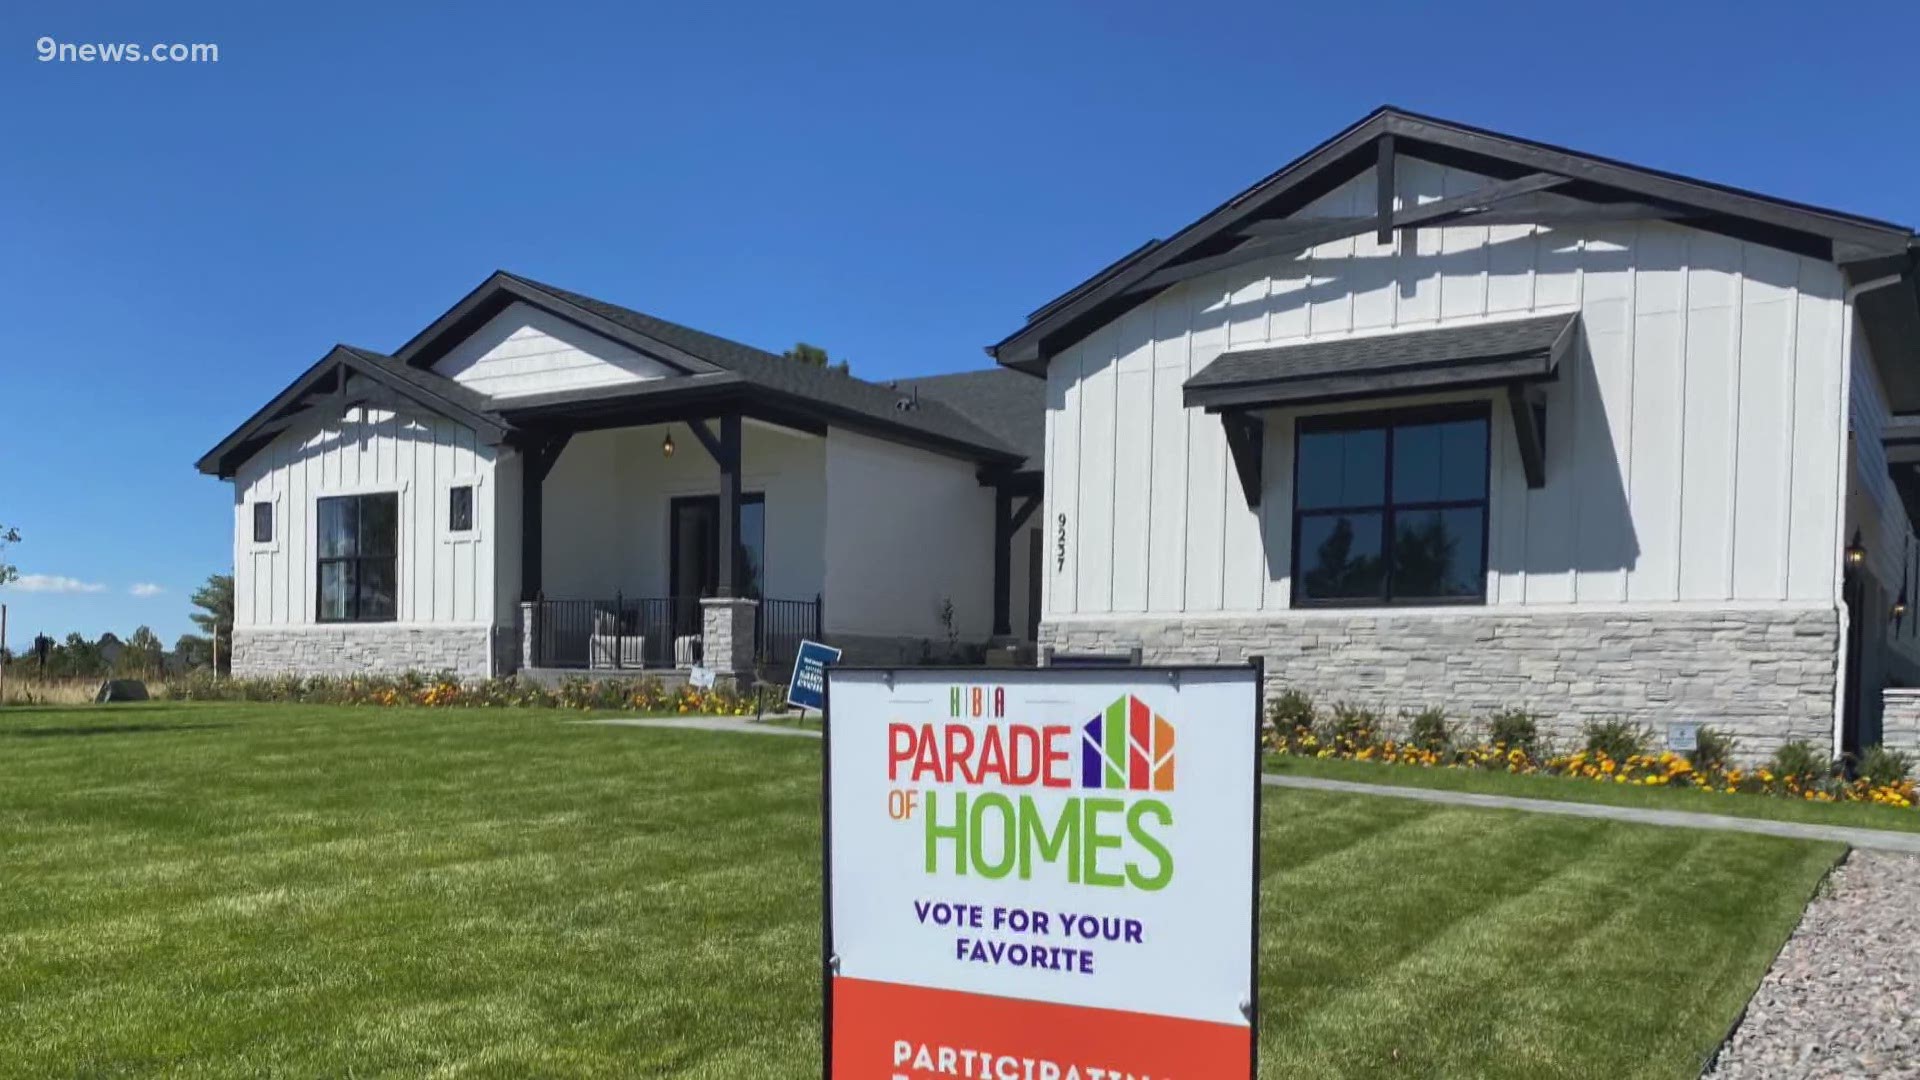 The Parade of Homes has been a tradition in Denver for decades. Here are some health and safety precautions organizers are taking this year.